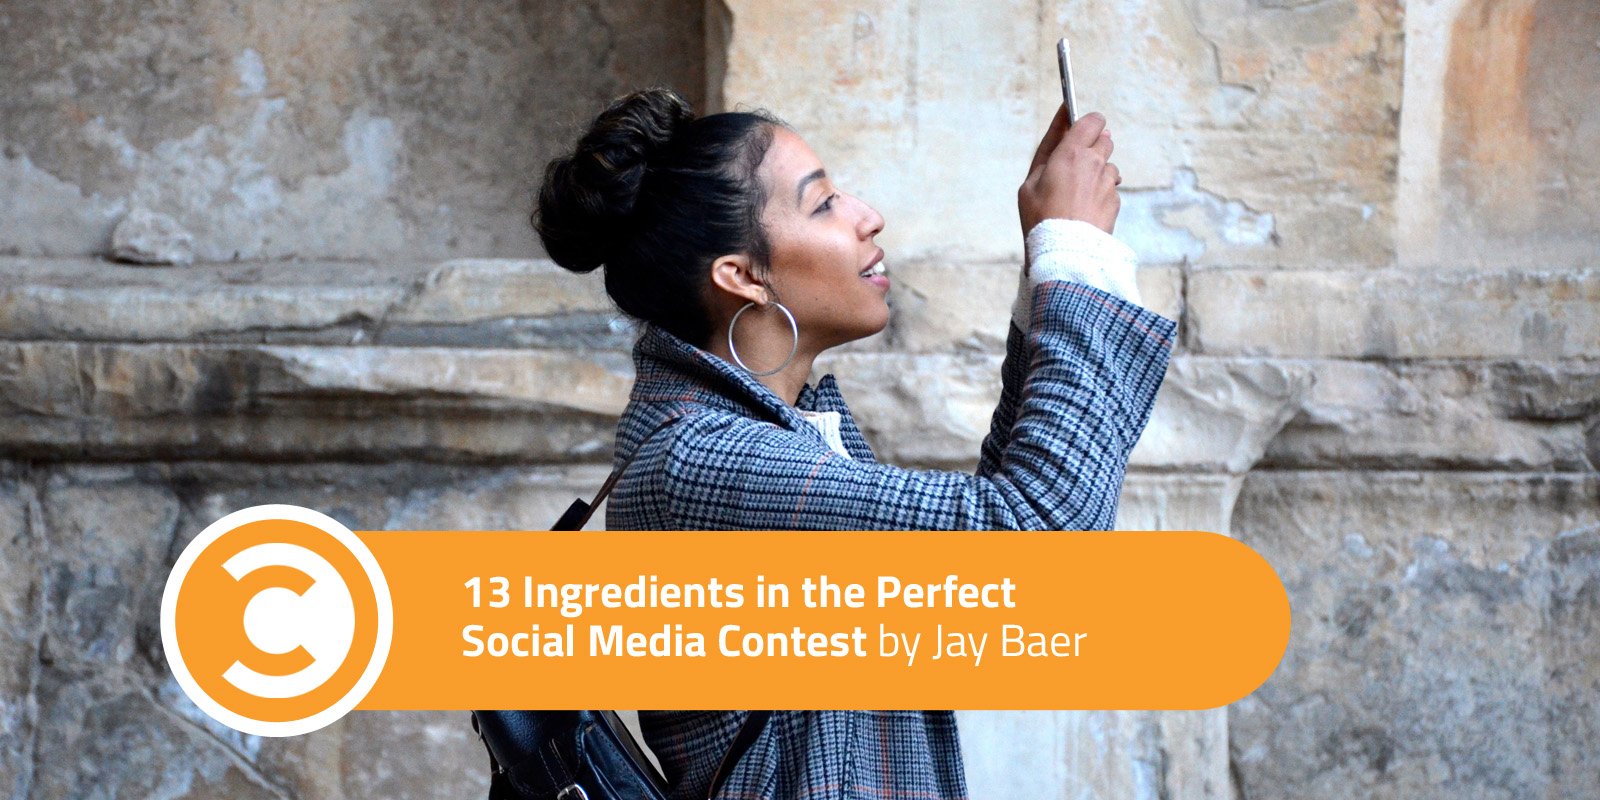 13 Ingredients in the Perfect Social Media Contest